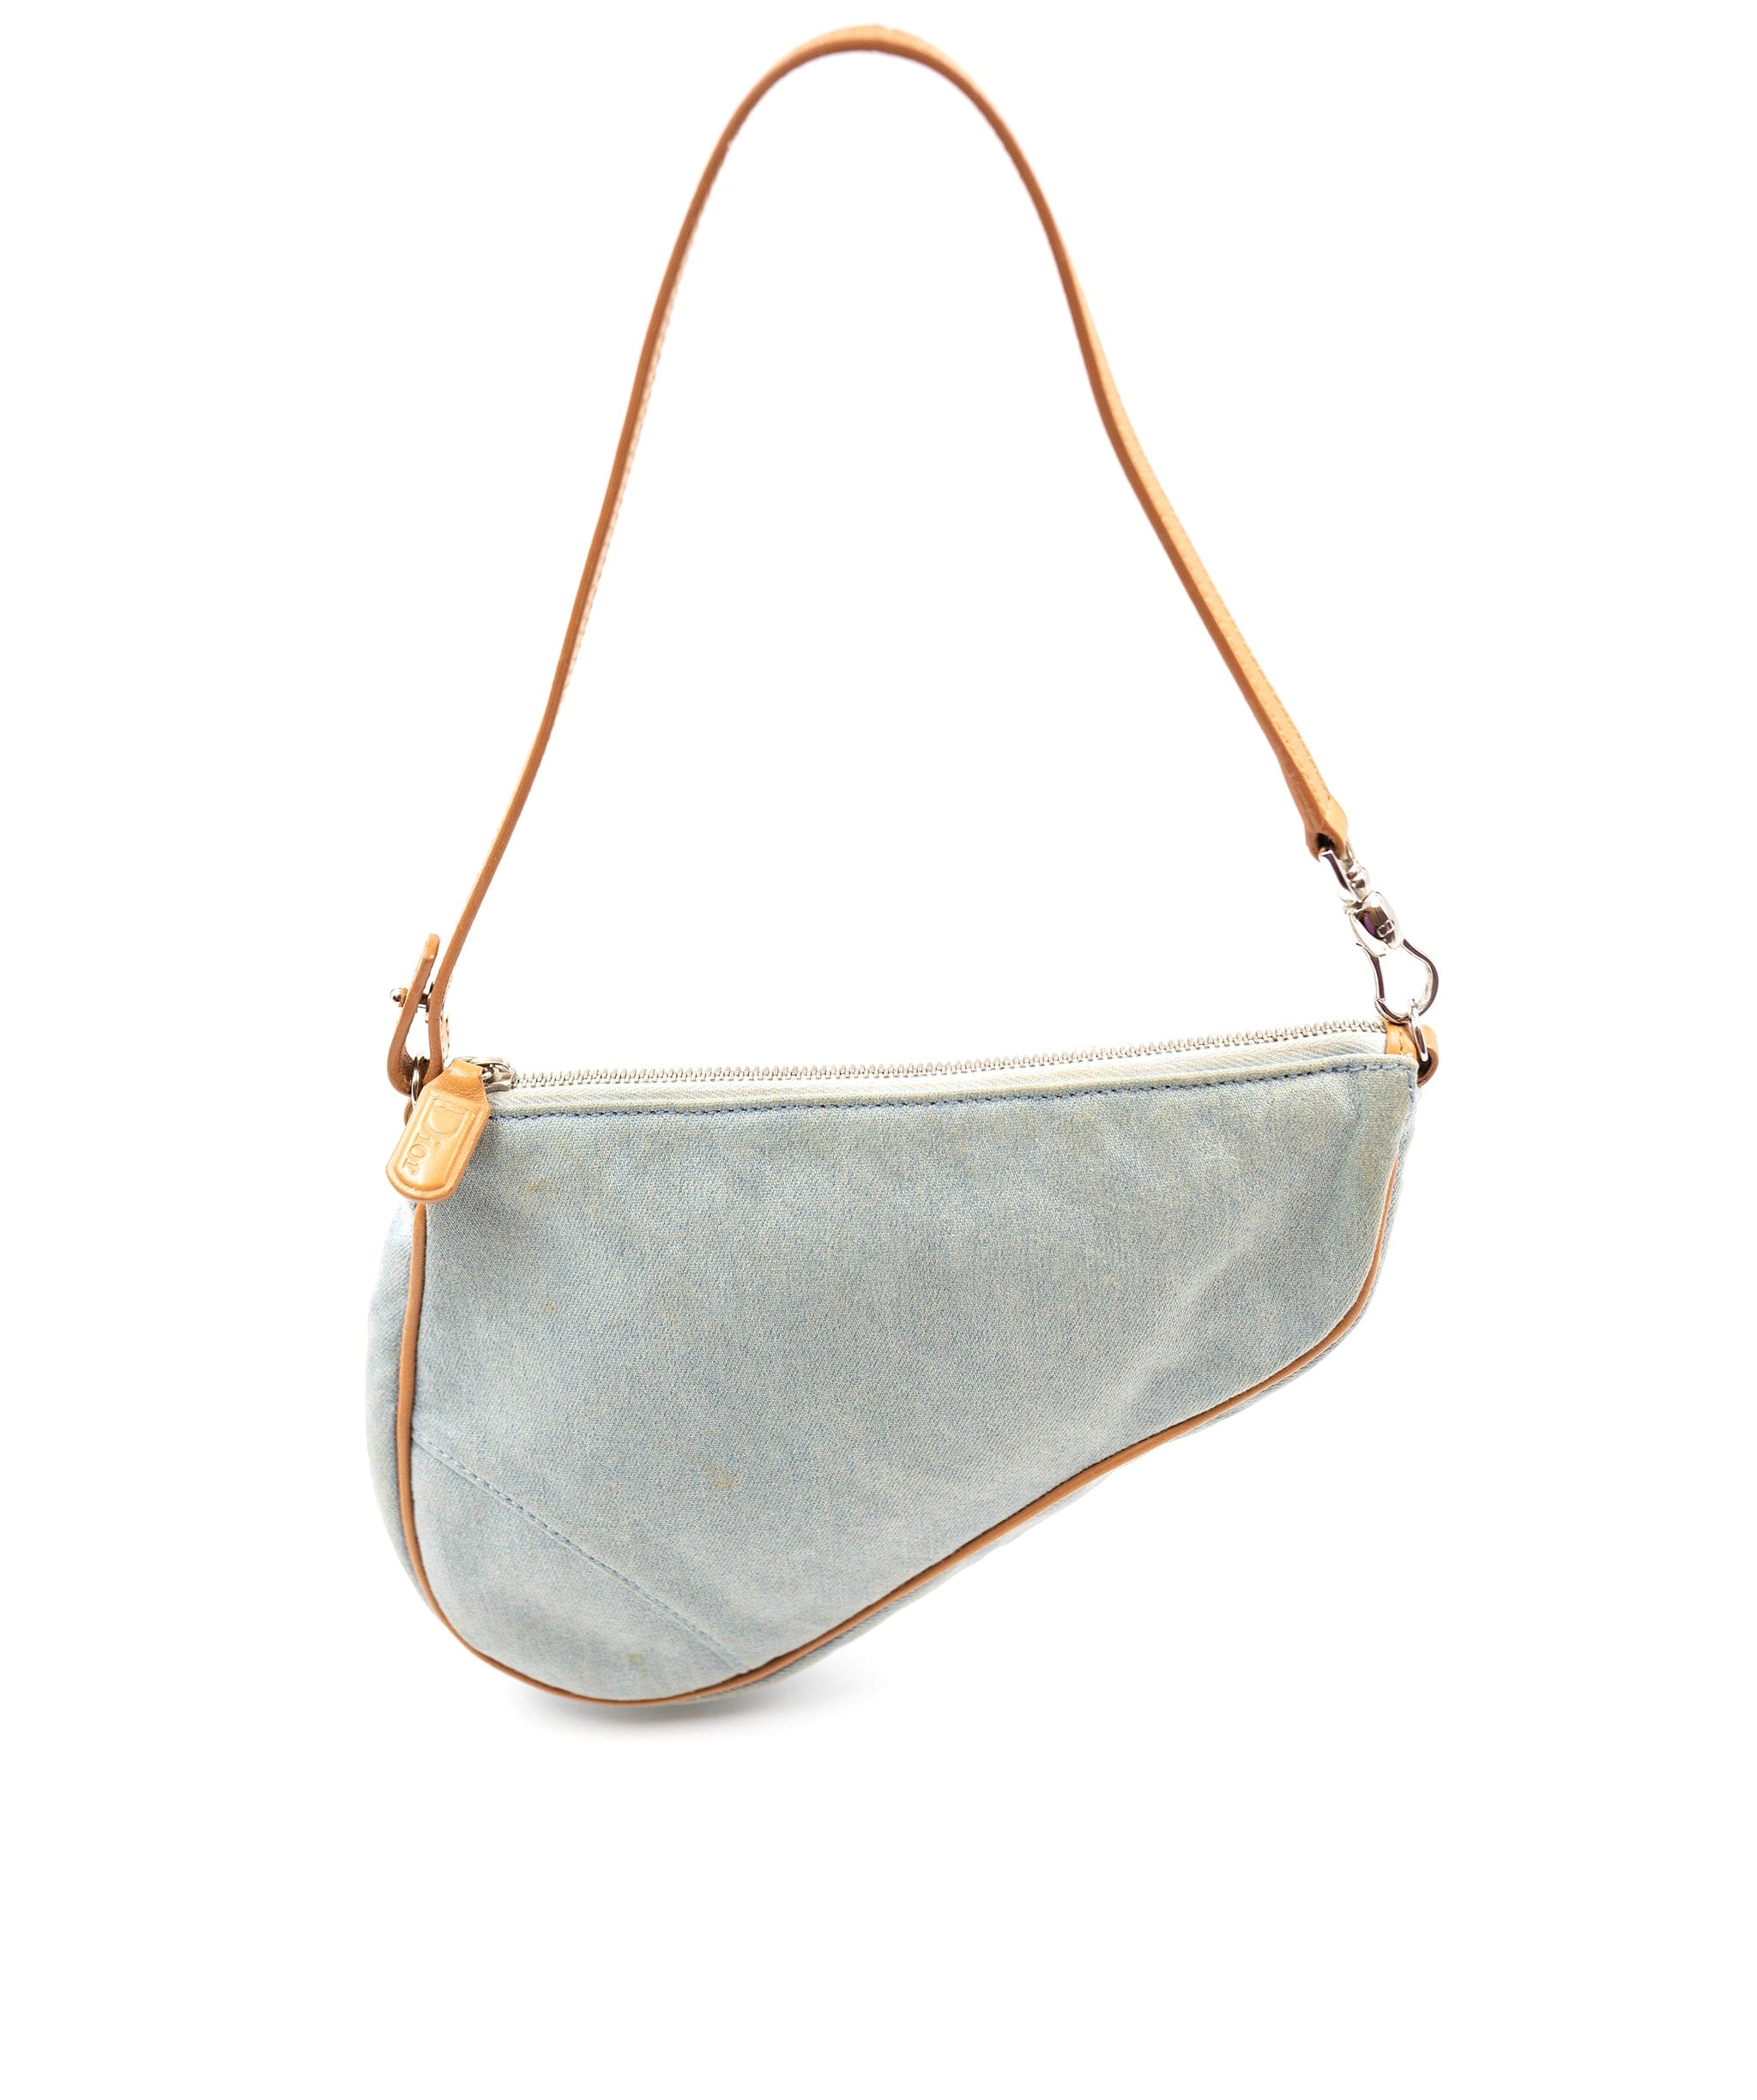 Christian Dior Christian Dior vintage light denim saddle bag. Features tan leather handle and traimmings, as well as silver hardware.  AGL2307